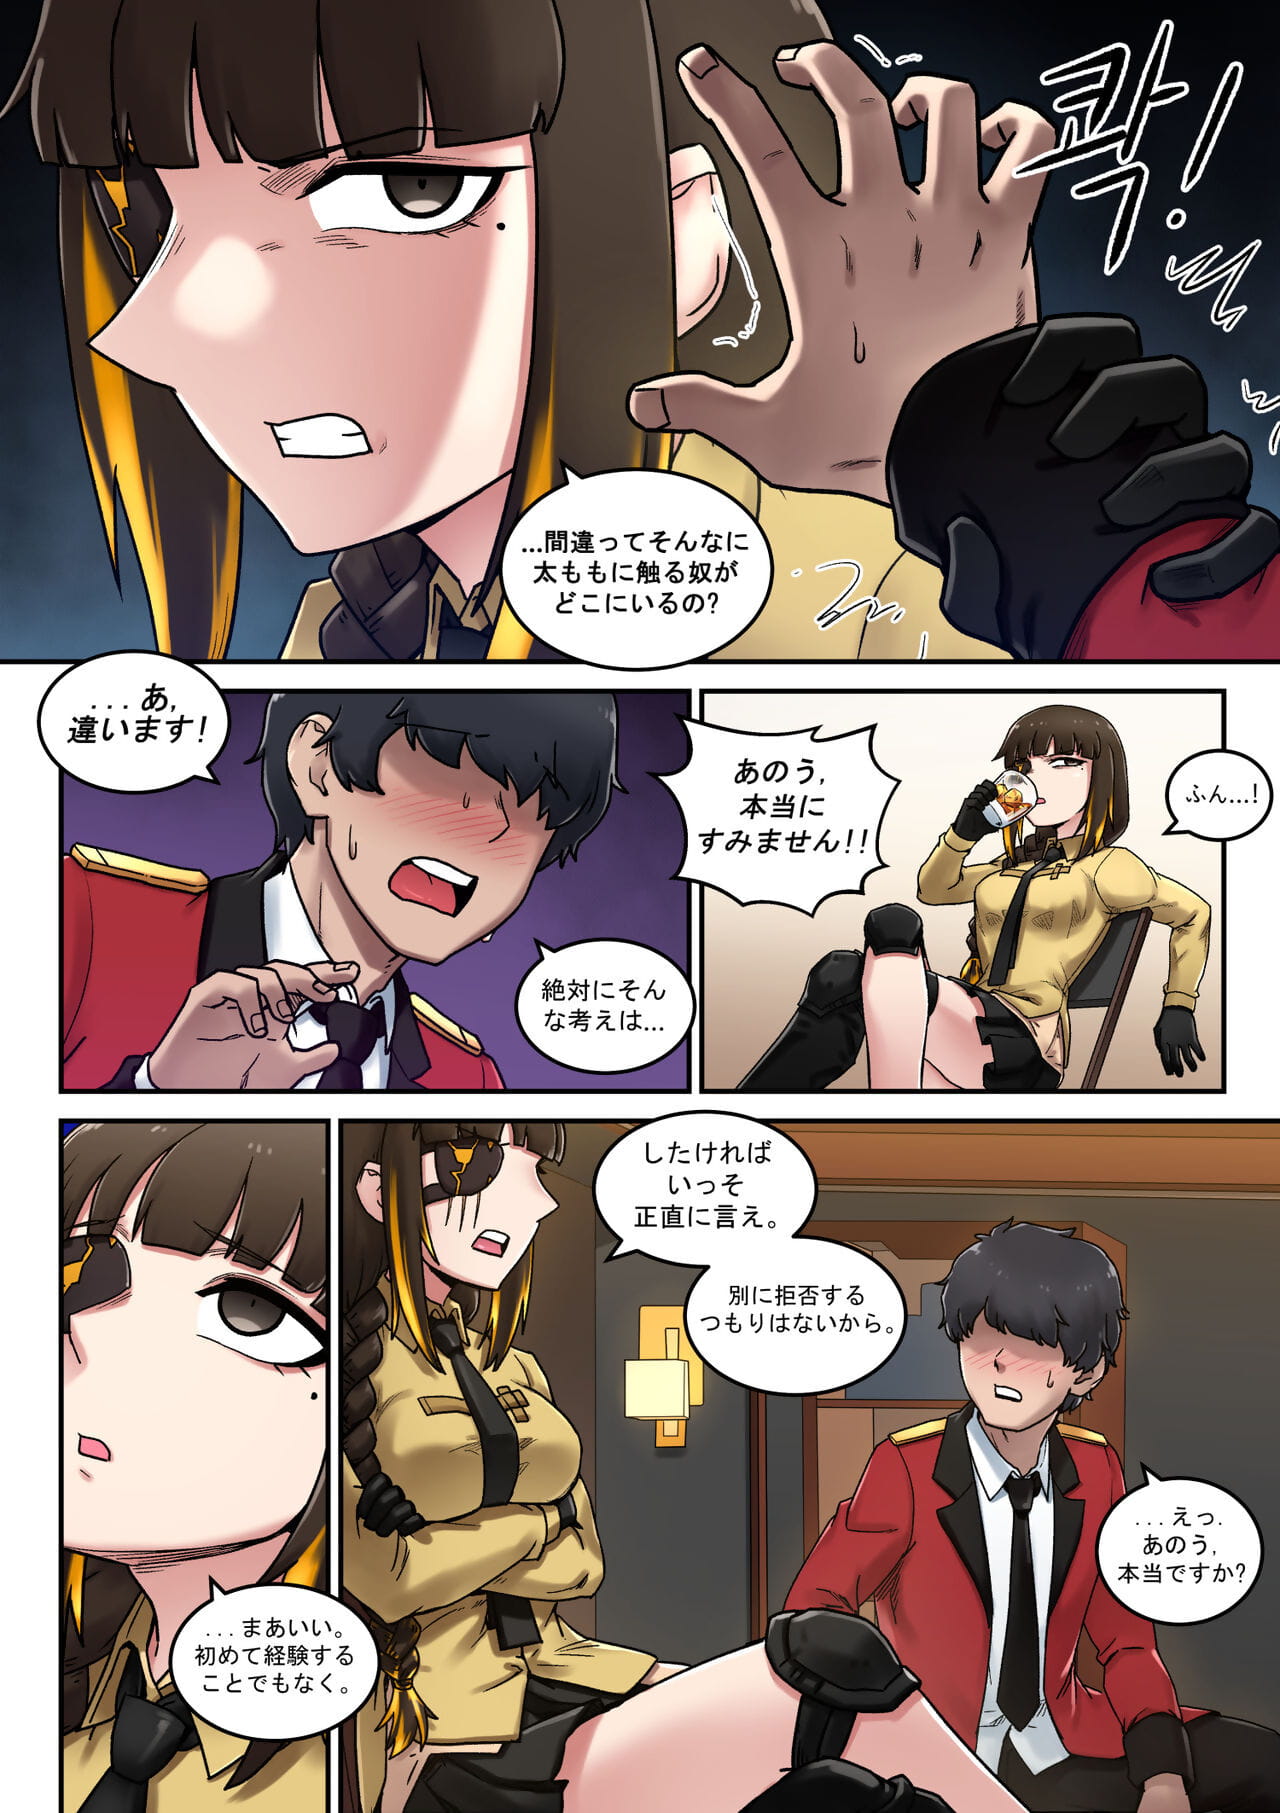 m16 コミック page 1